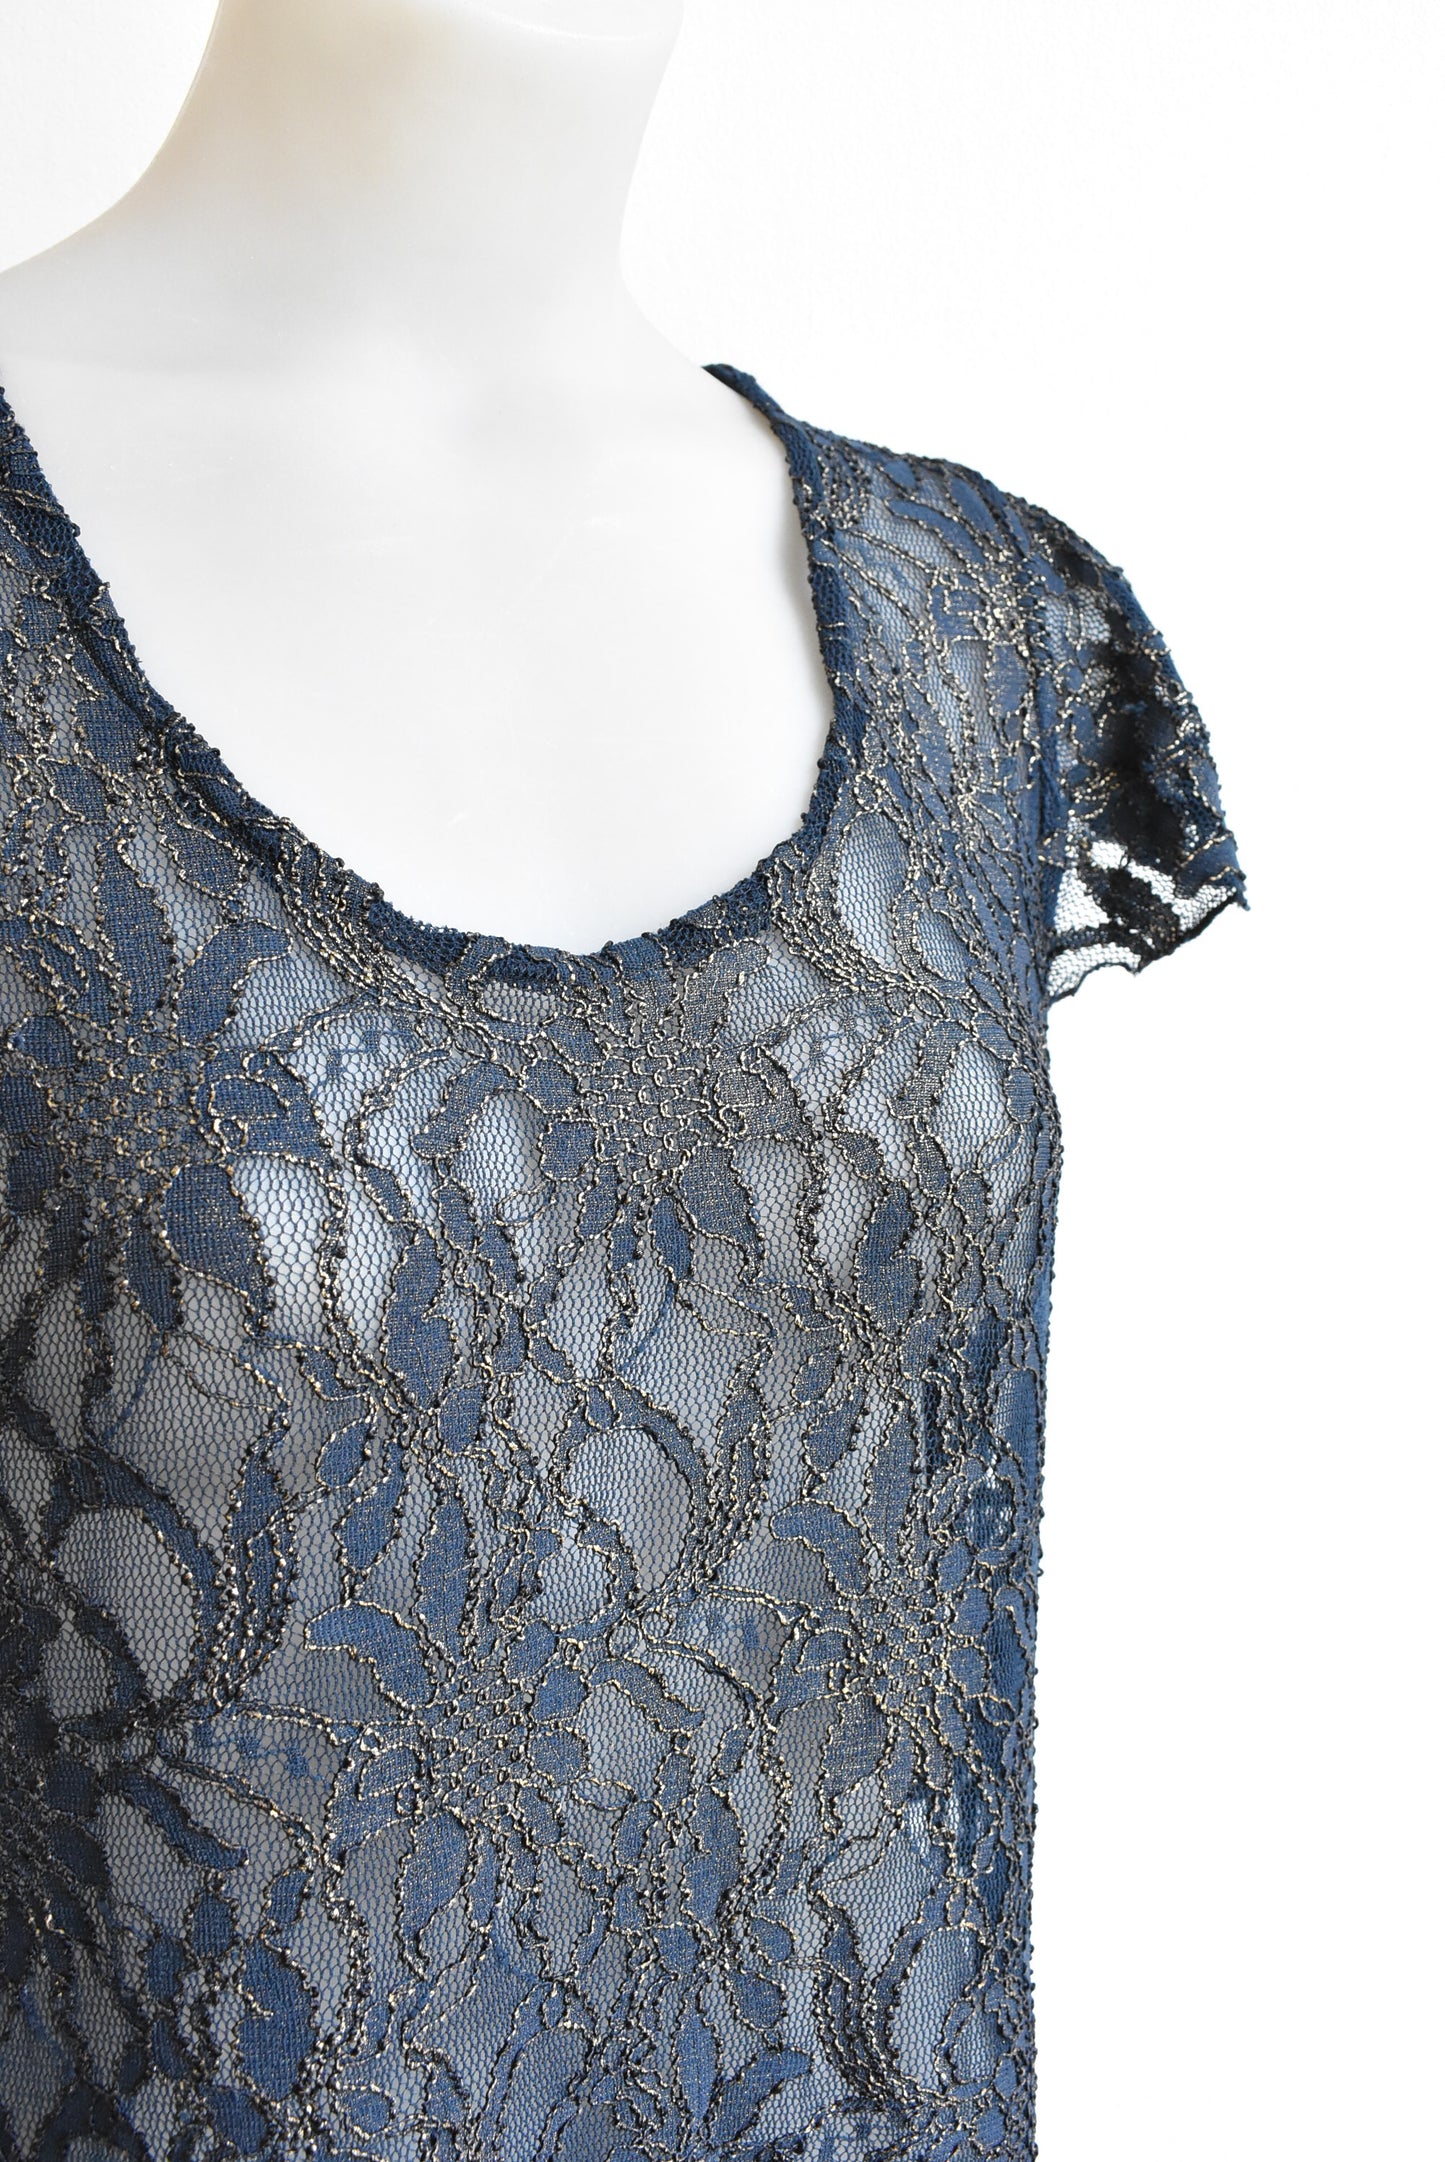 Vintage Collections navy and gold lace dress, size L